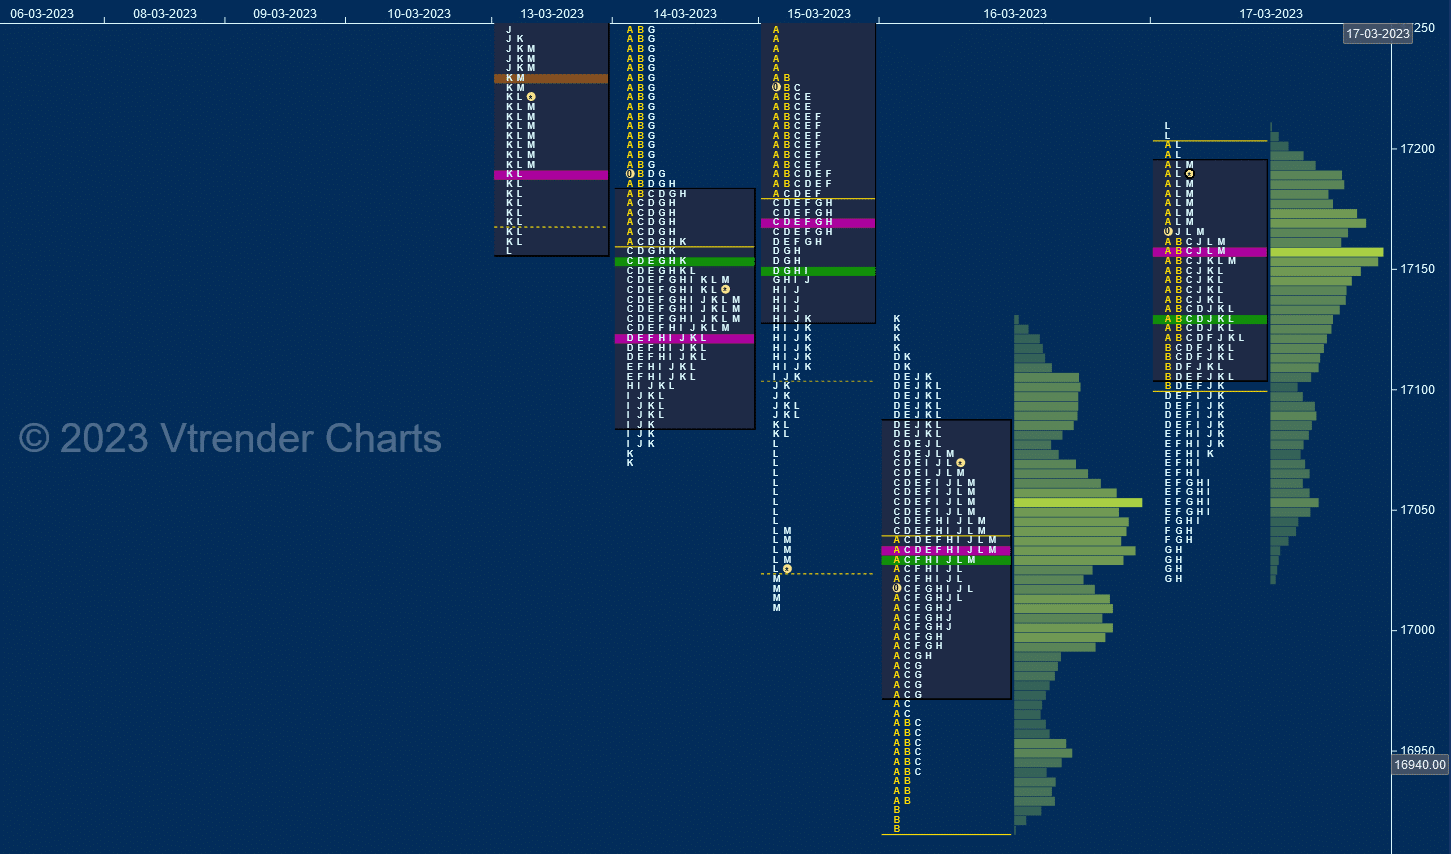 Nf 11 Market Profile Analysis Dated 17Th Mar 2023 Banknifty Futures, Charts, Day Trading, Intraday Trading, Intraday Trading Strategies, Market Profile, Market Profile Trading Strategies, Nifty Futures, Order Flow Analysis, Support And Resistance, Technical Analysis, Trading Strategies, Volume Profile Trading